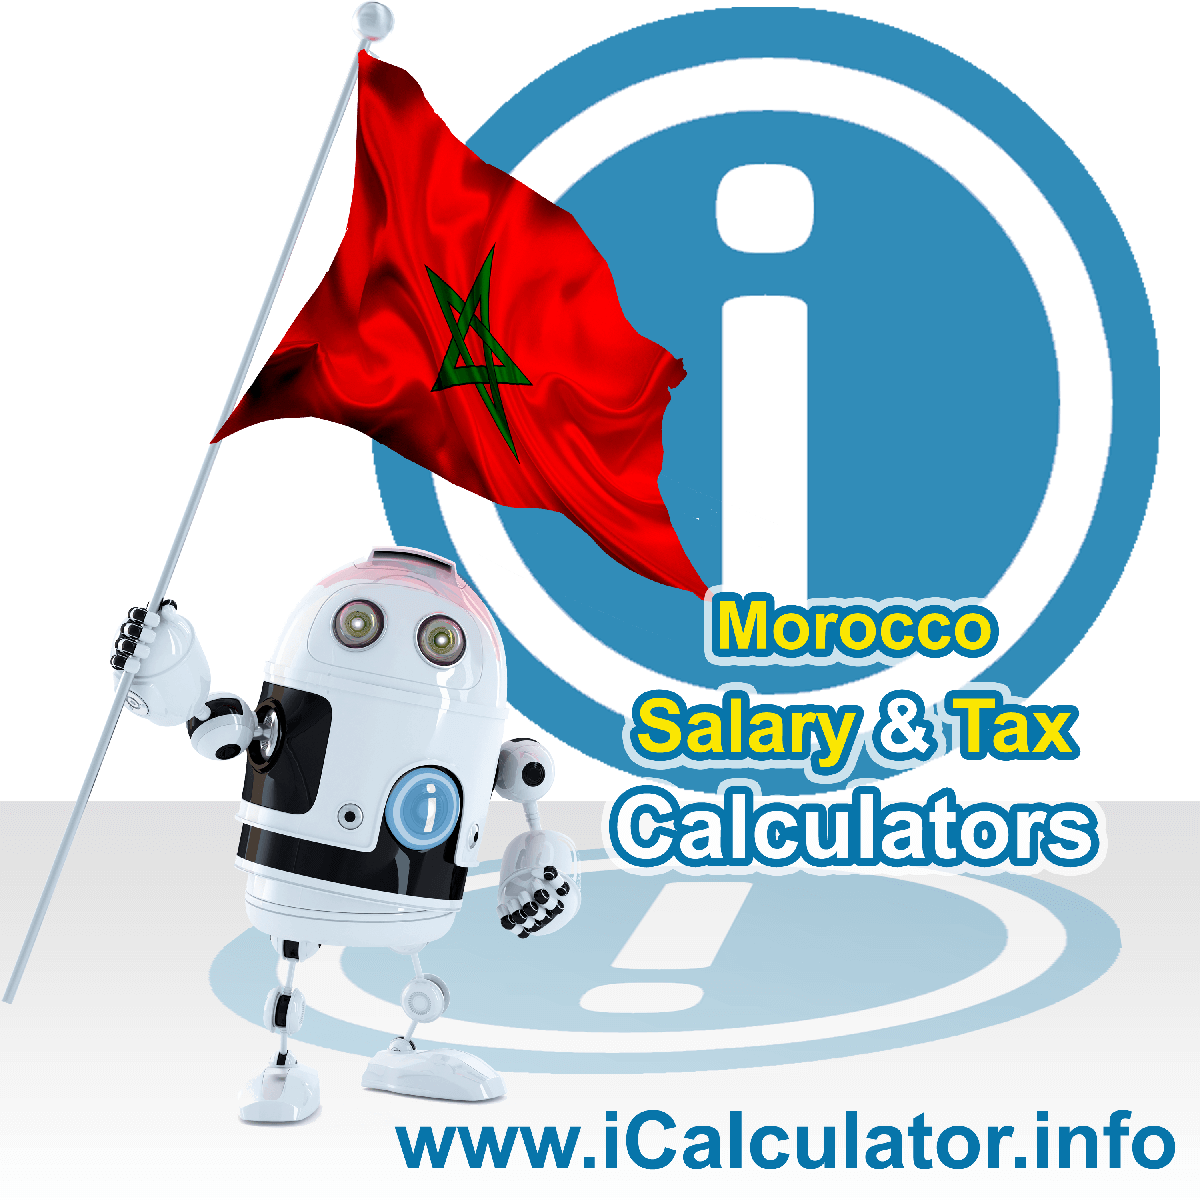 Morocco Tax Calculator. This image shows the Morocco flag and information relating to the tax formula for the Morocco Salary Calculator